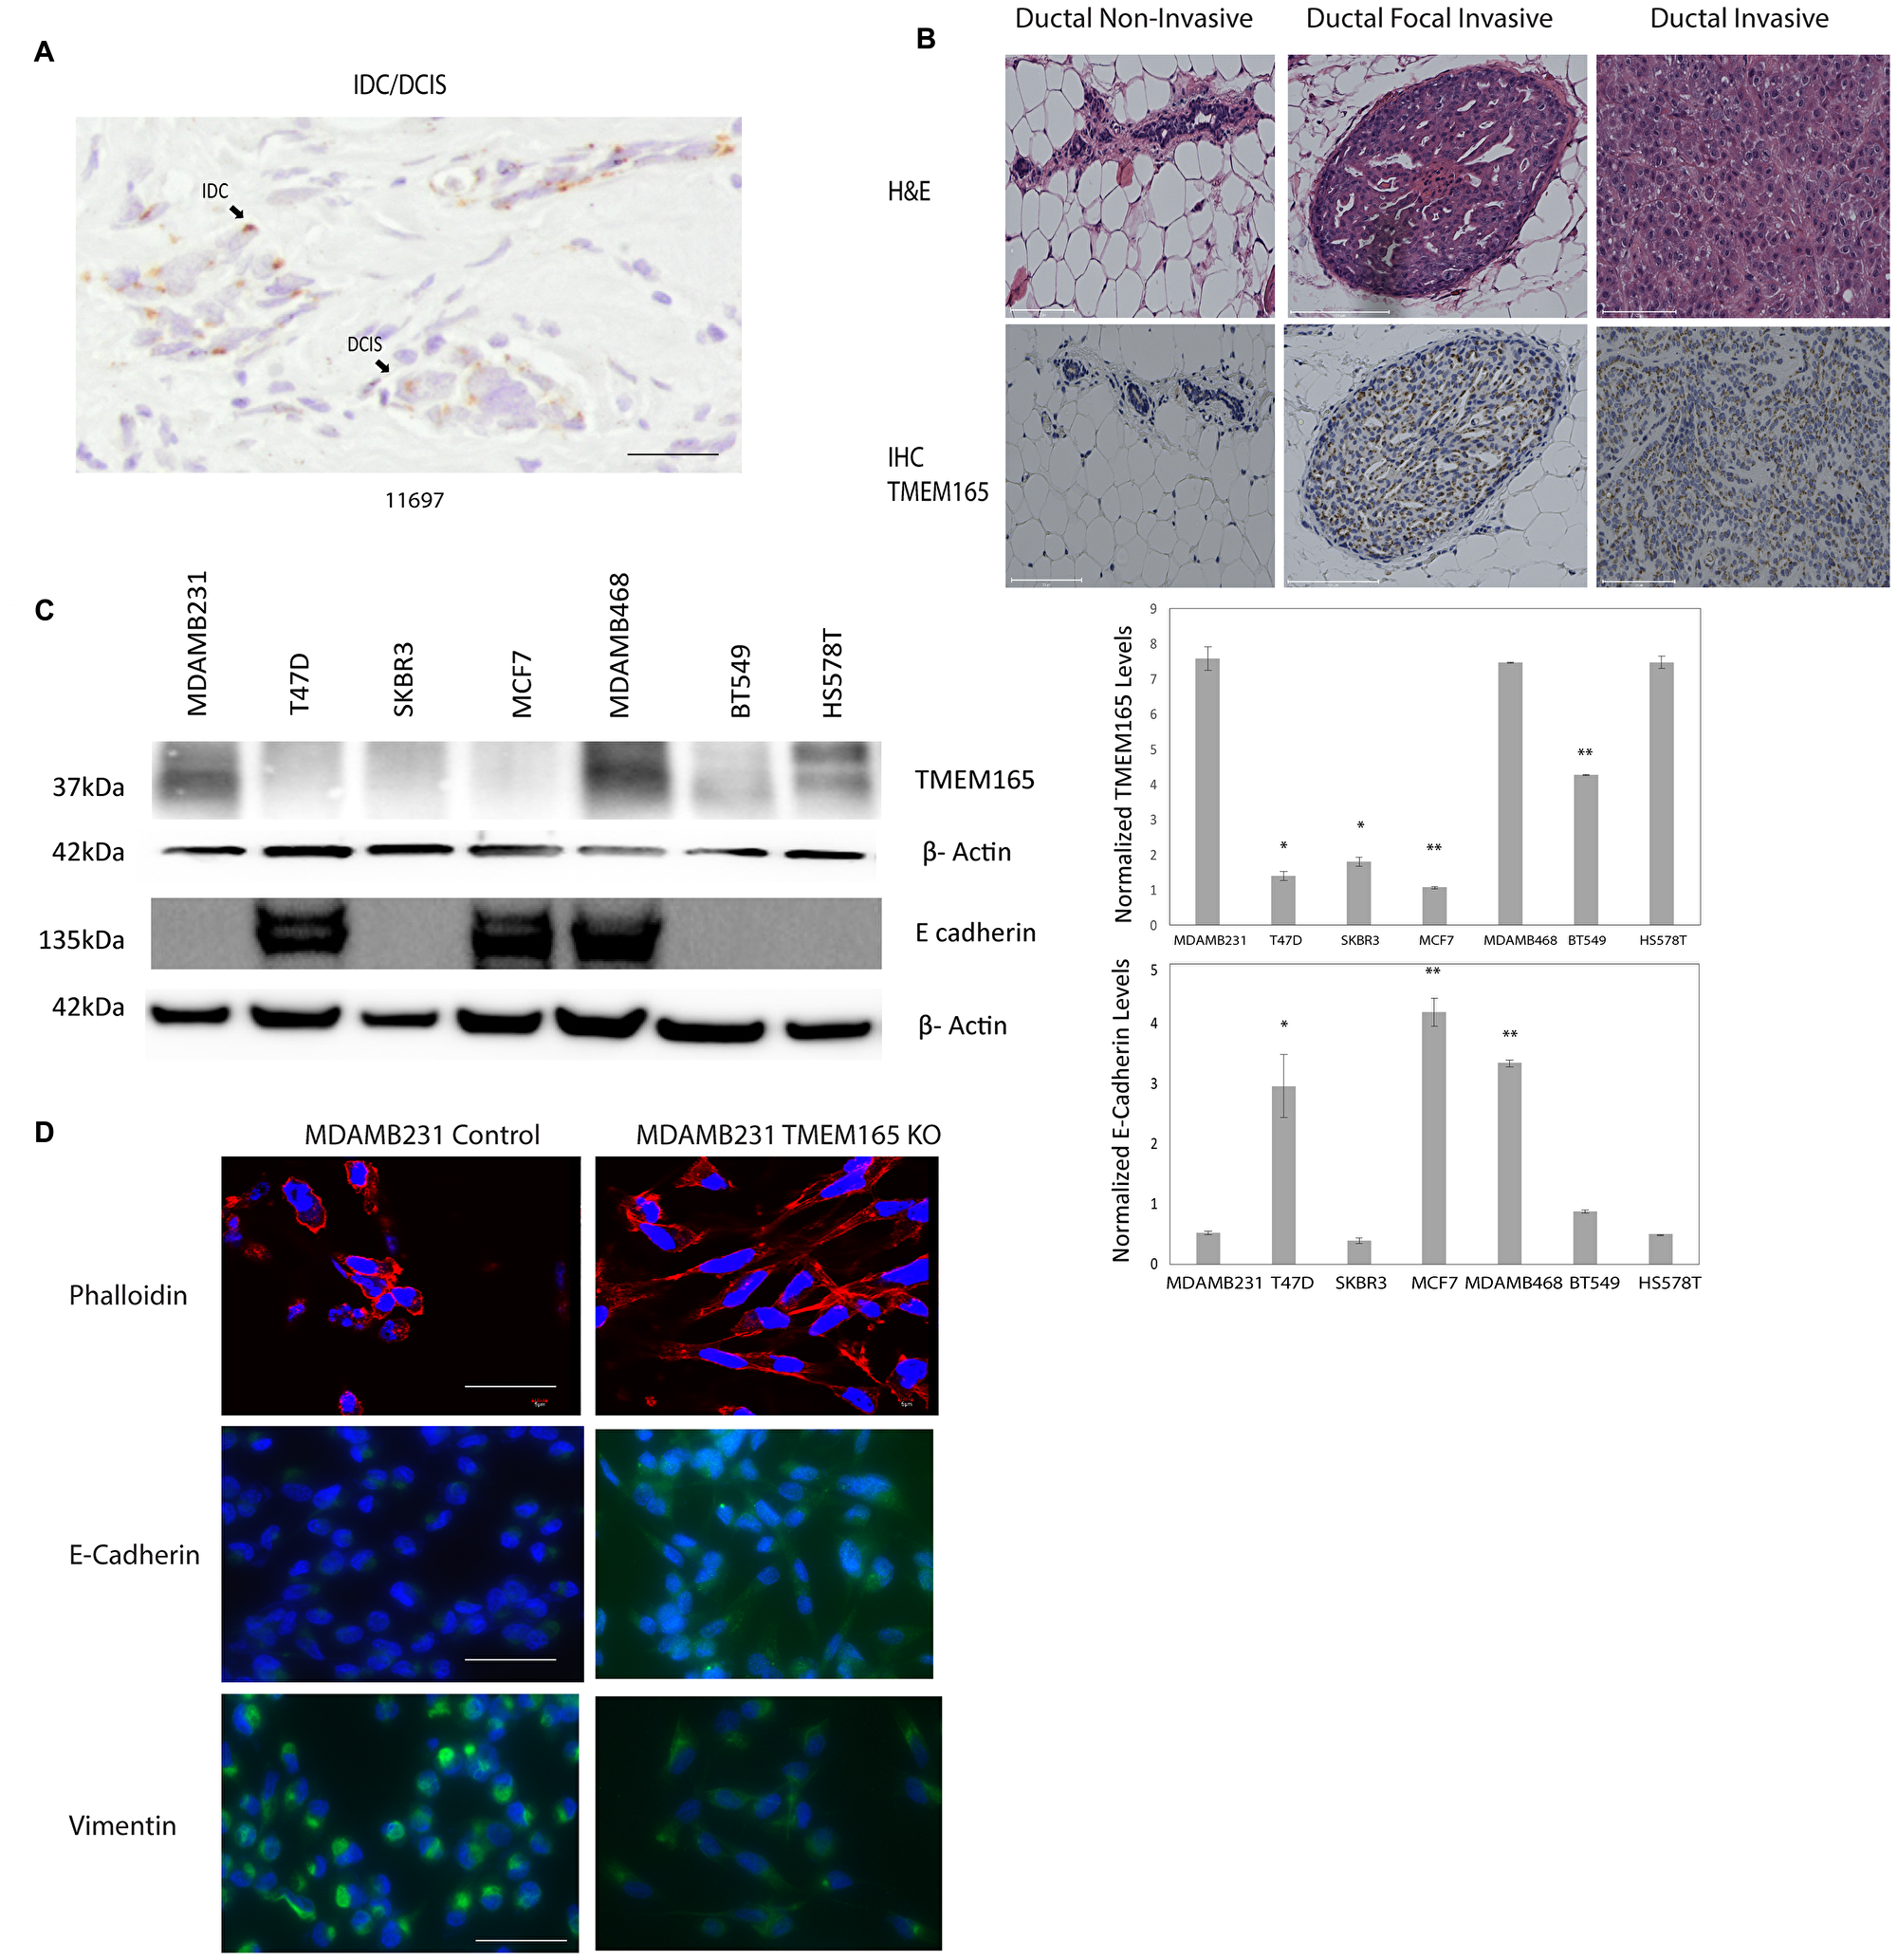 TMEM165 is increased in human breast cancer tissues and cell lines.